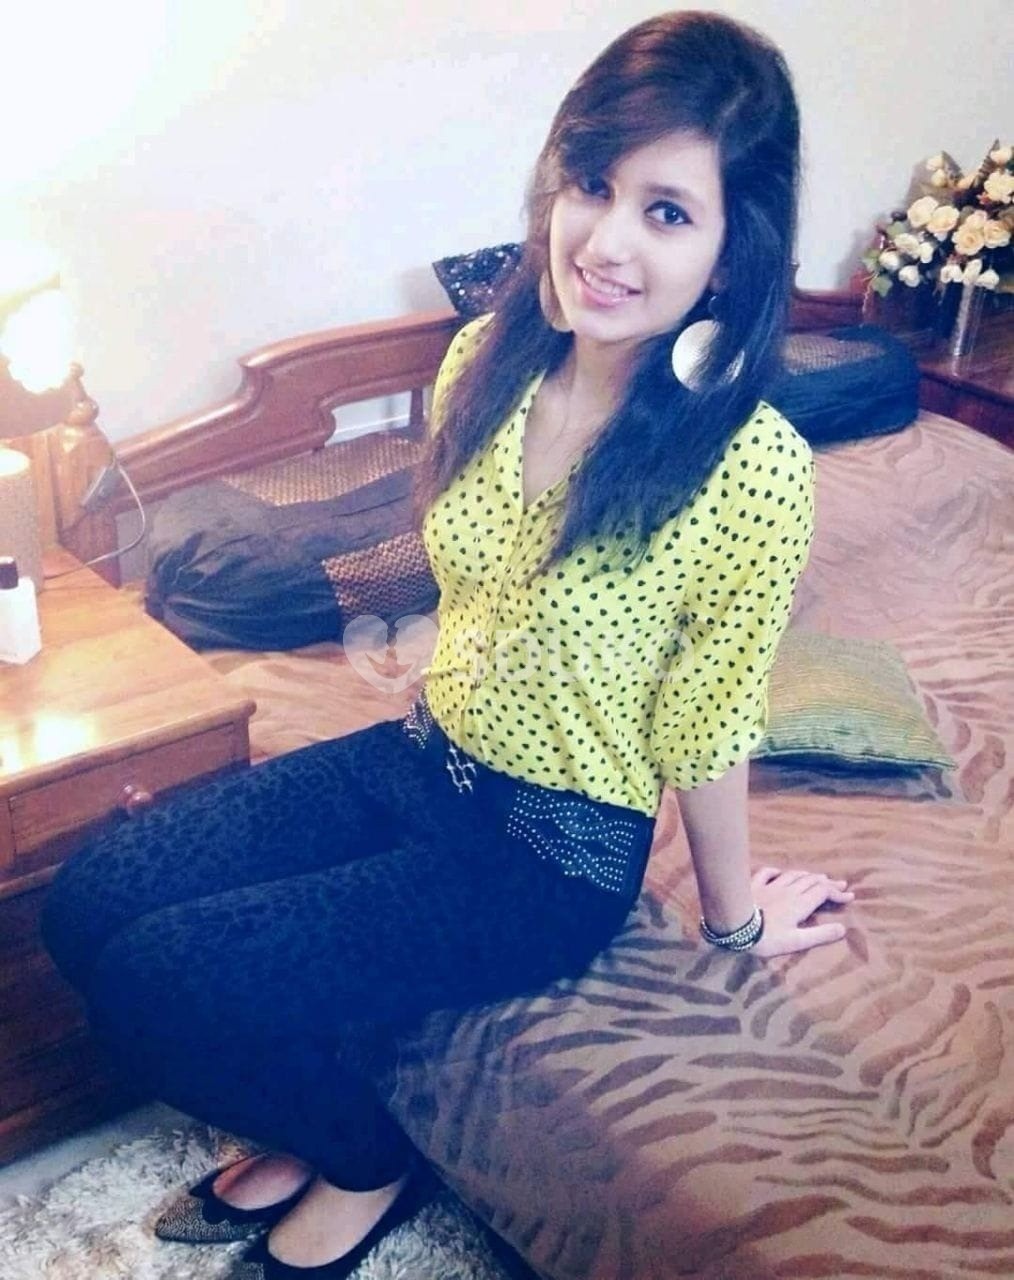 Call girl in Hyderabad self and secure high profile girl available. Now